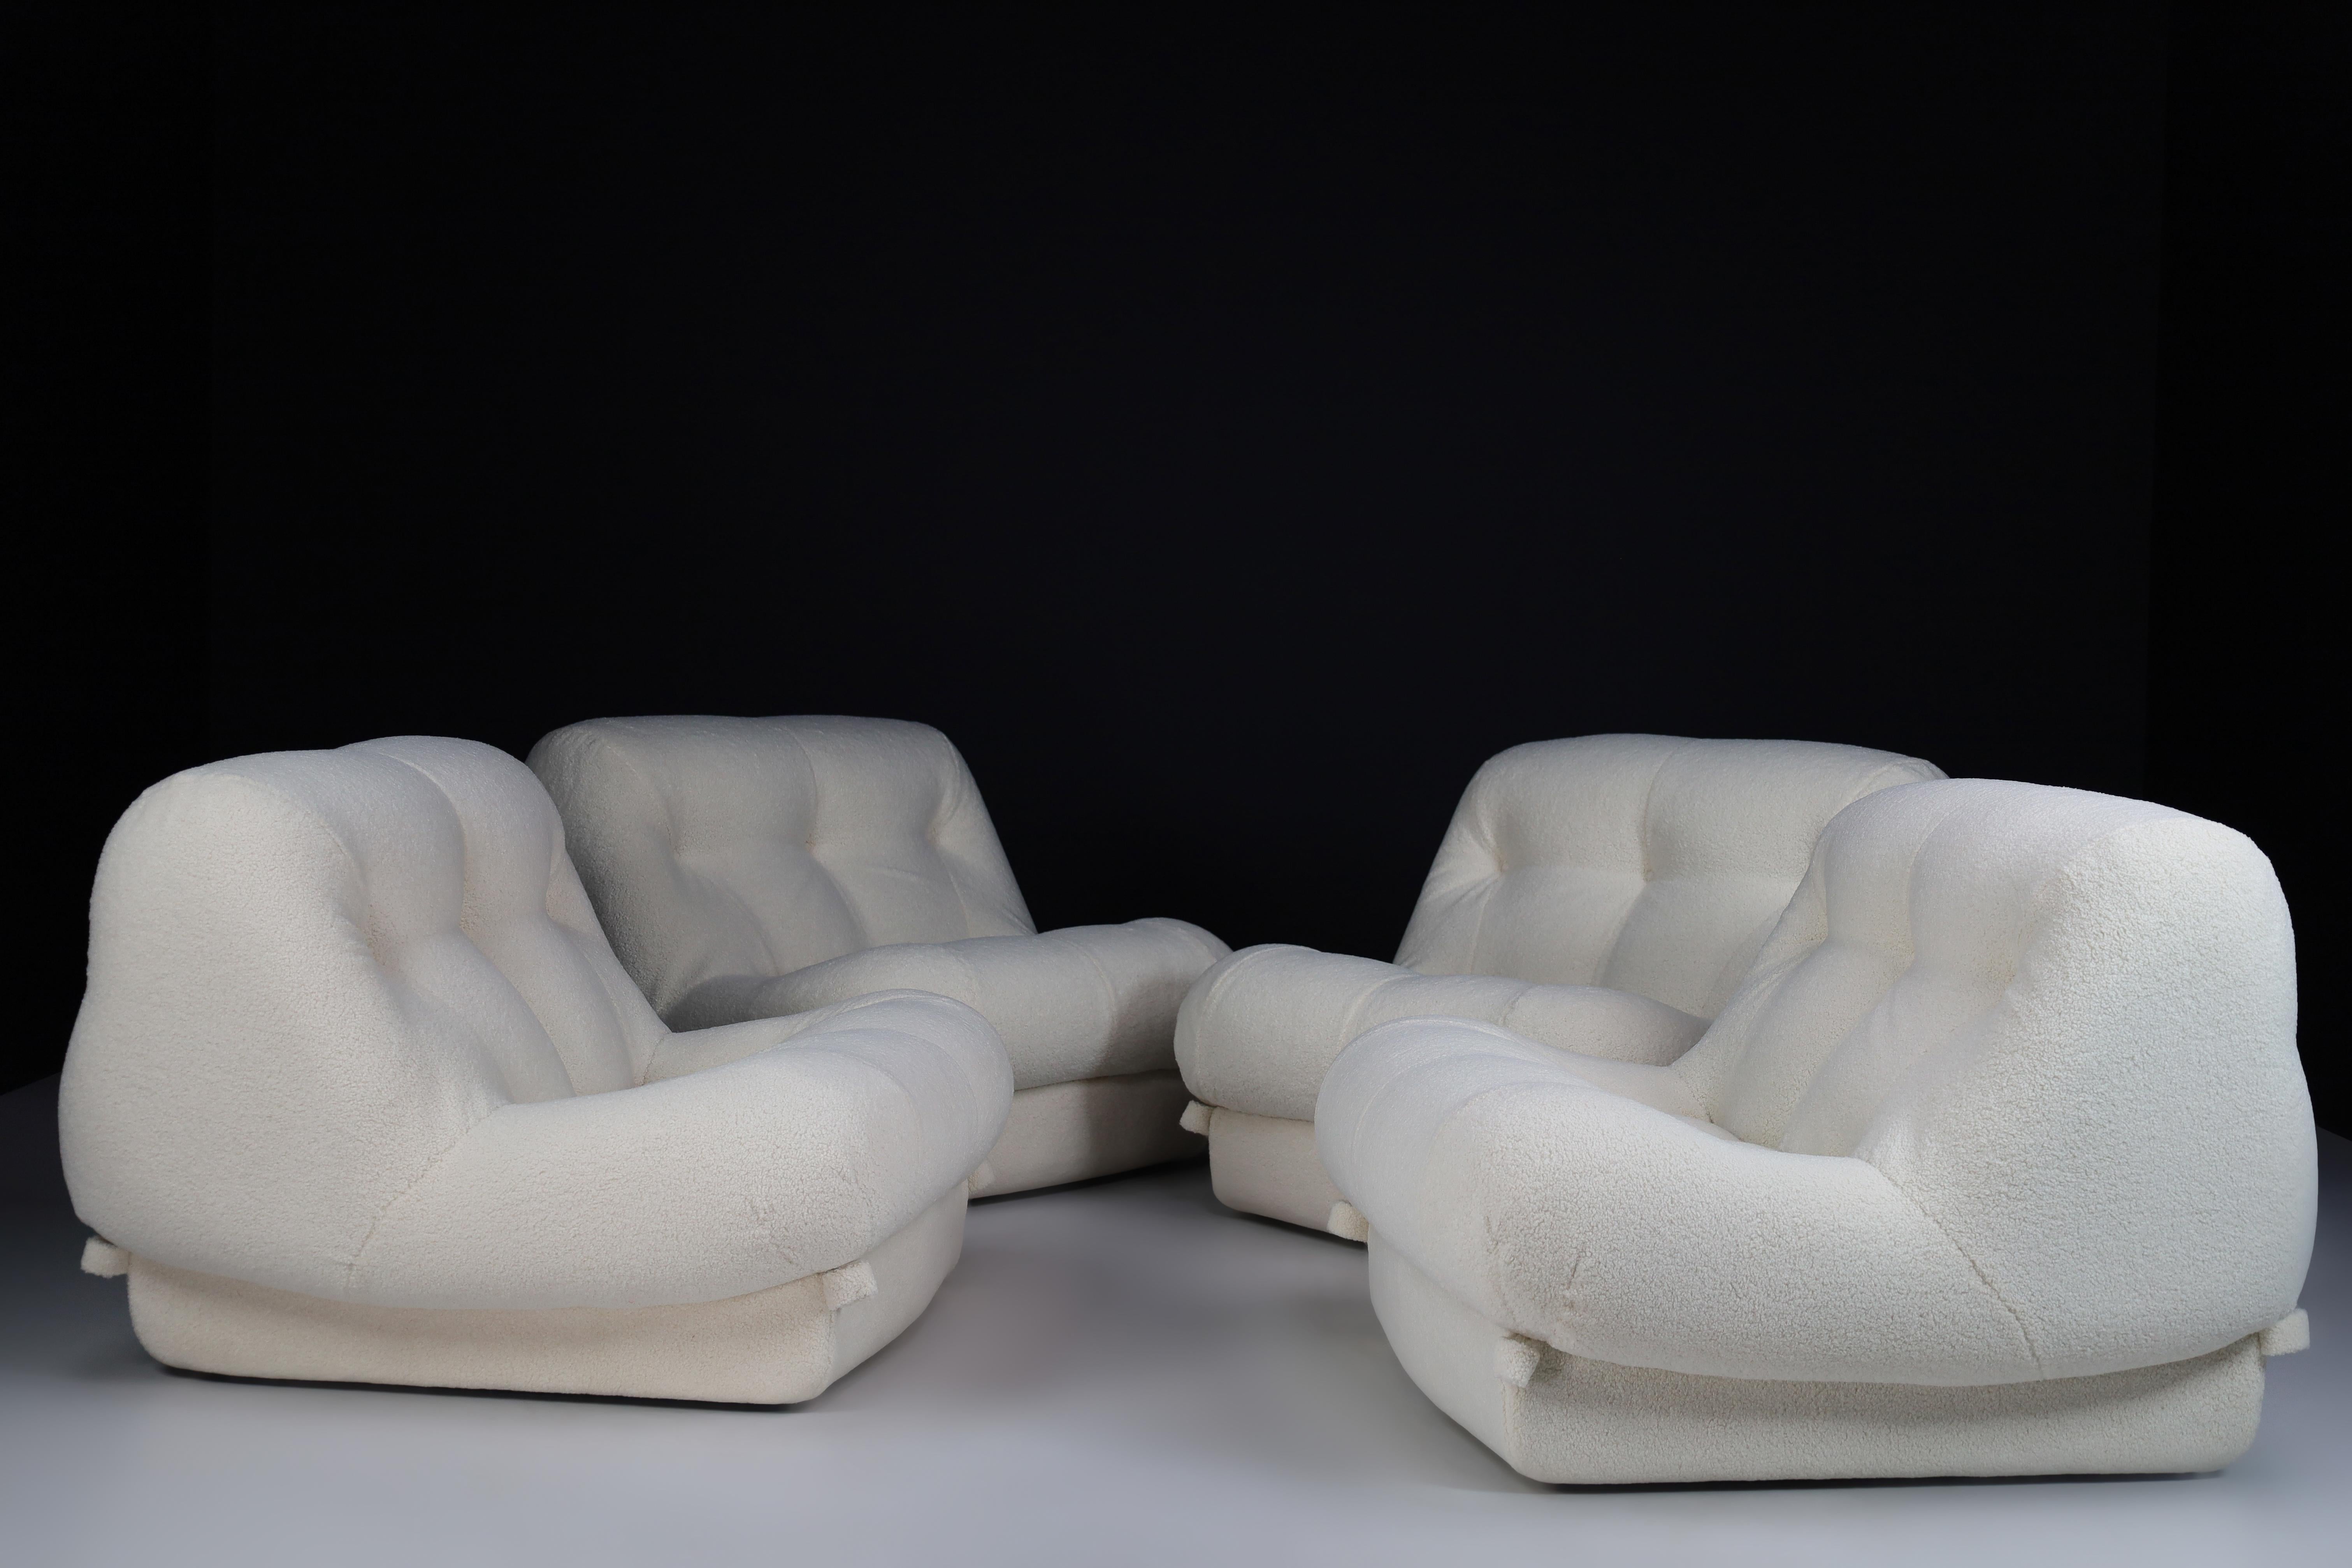 Rimo Maturi for Mimo Padova Teddy Lounge chairs-sofa, Italy 1970s

Oversized modular sofa/lounge chairs by Italian designer Rimo Maturi for manufacturer Mimo Padova. The ''Nuvulone'', meaning ''cloud'' in Italian, consists of four seating pieces,